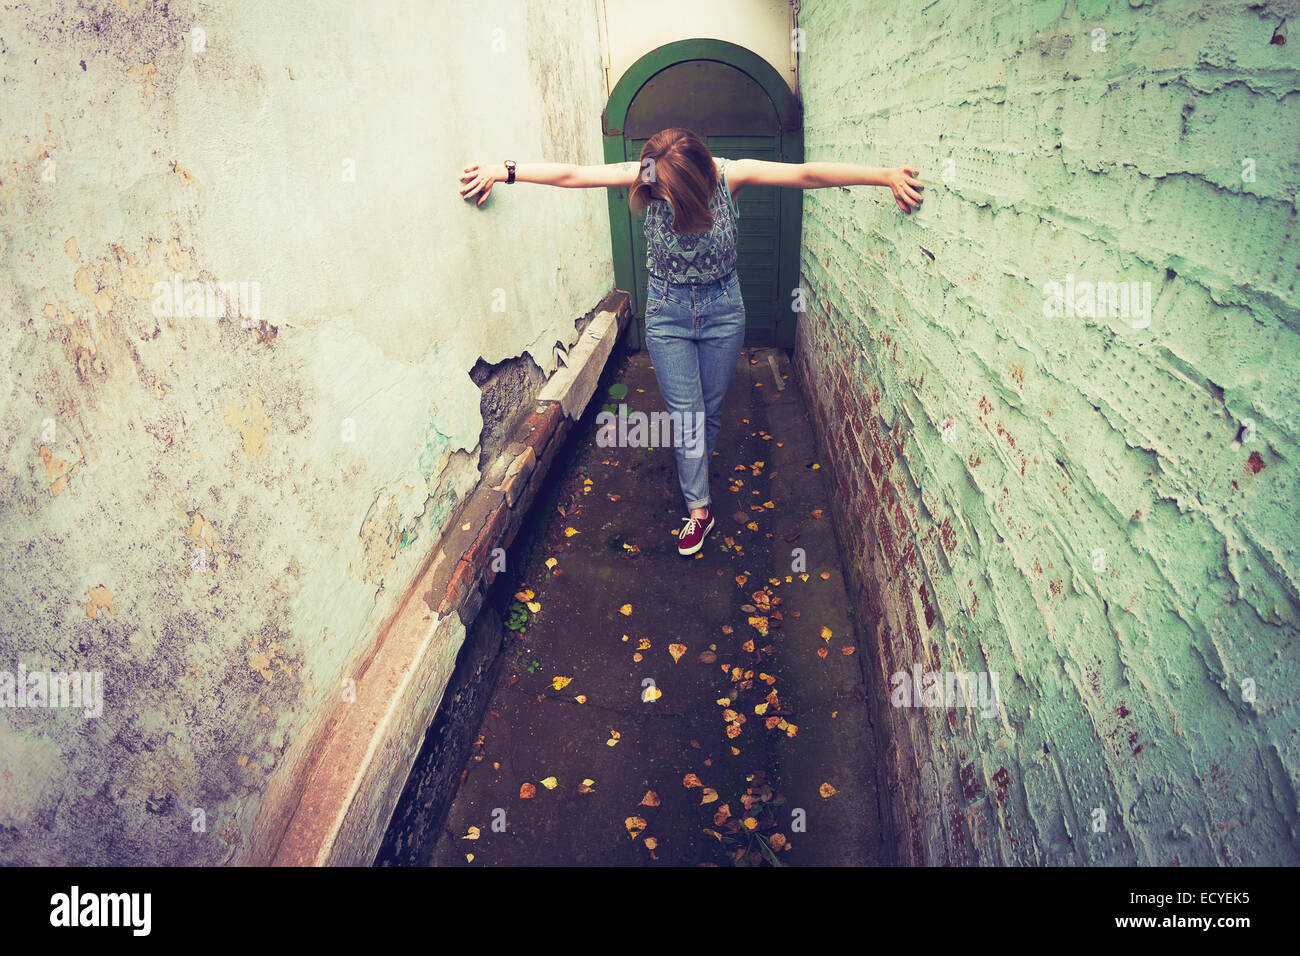 Woman touching walls in alley Stock Photo